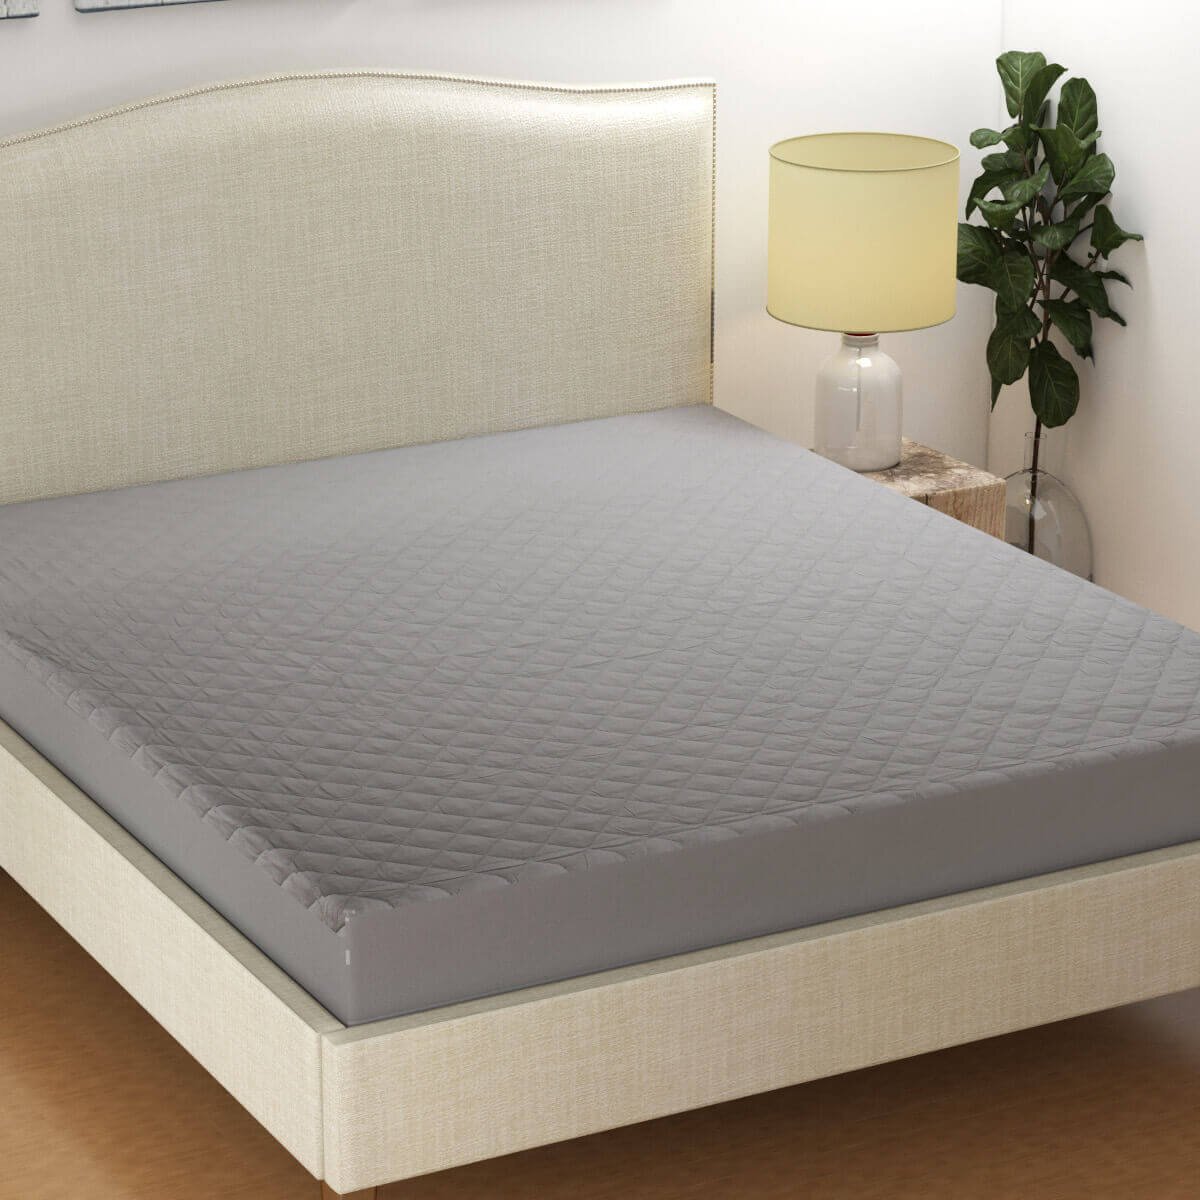 Buy fitted mattress protector